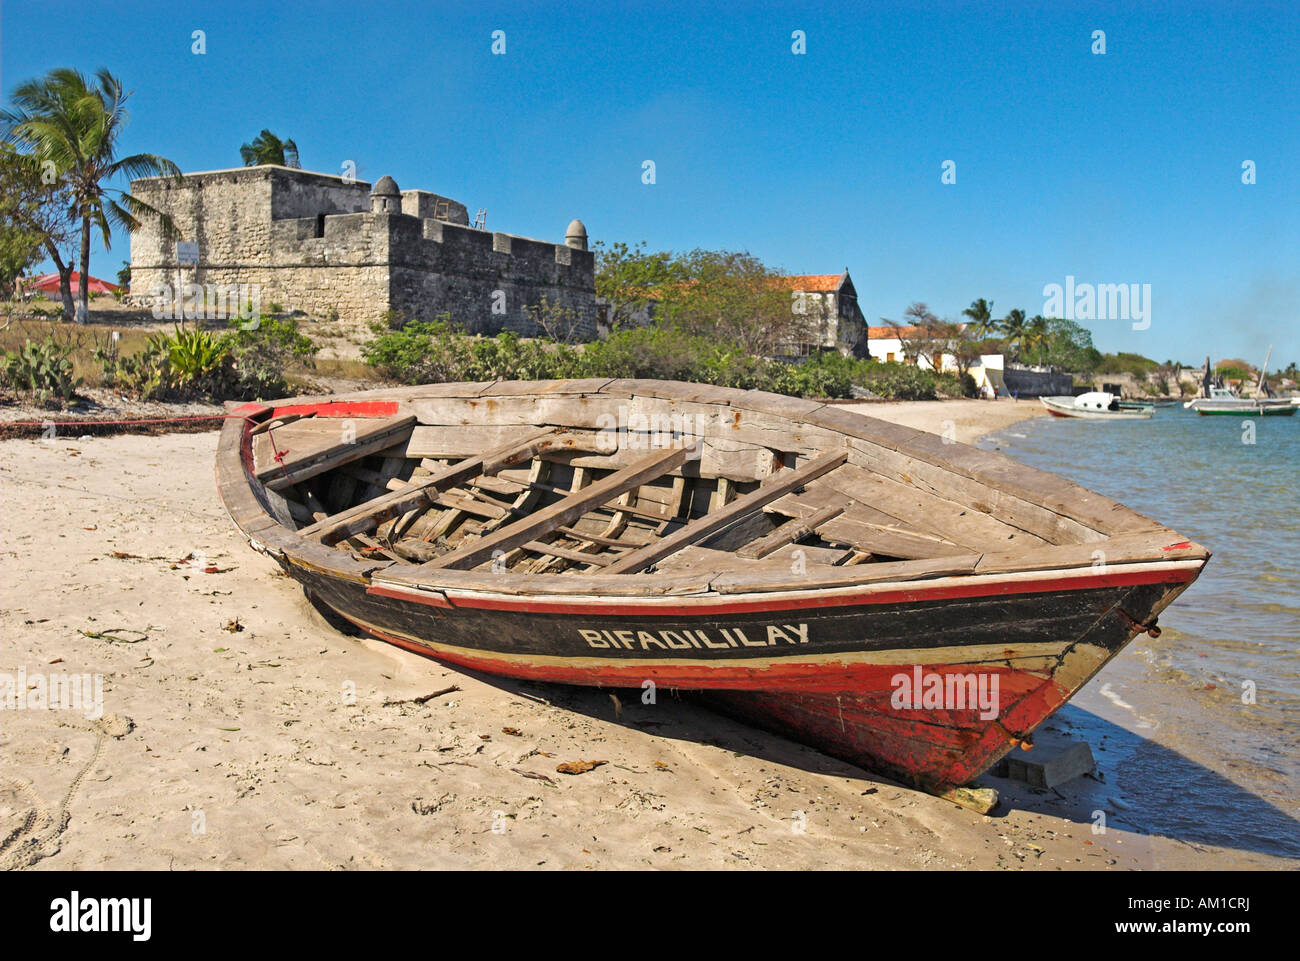 Fishing boat at the beach of Ibo Island, Quirimbas islands, Mozambique, Africa Stock Photo